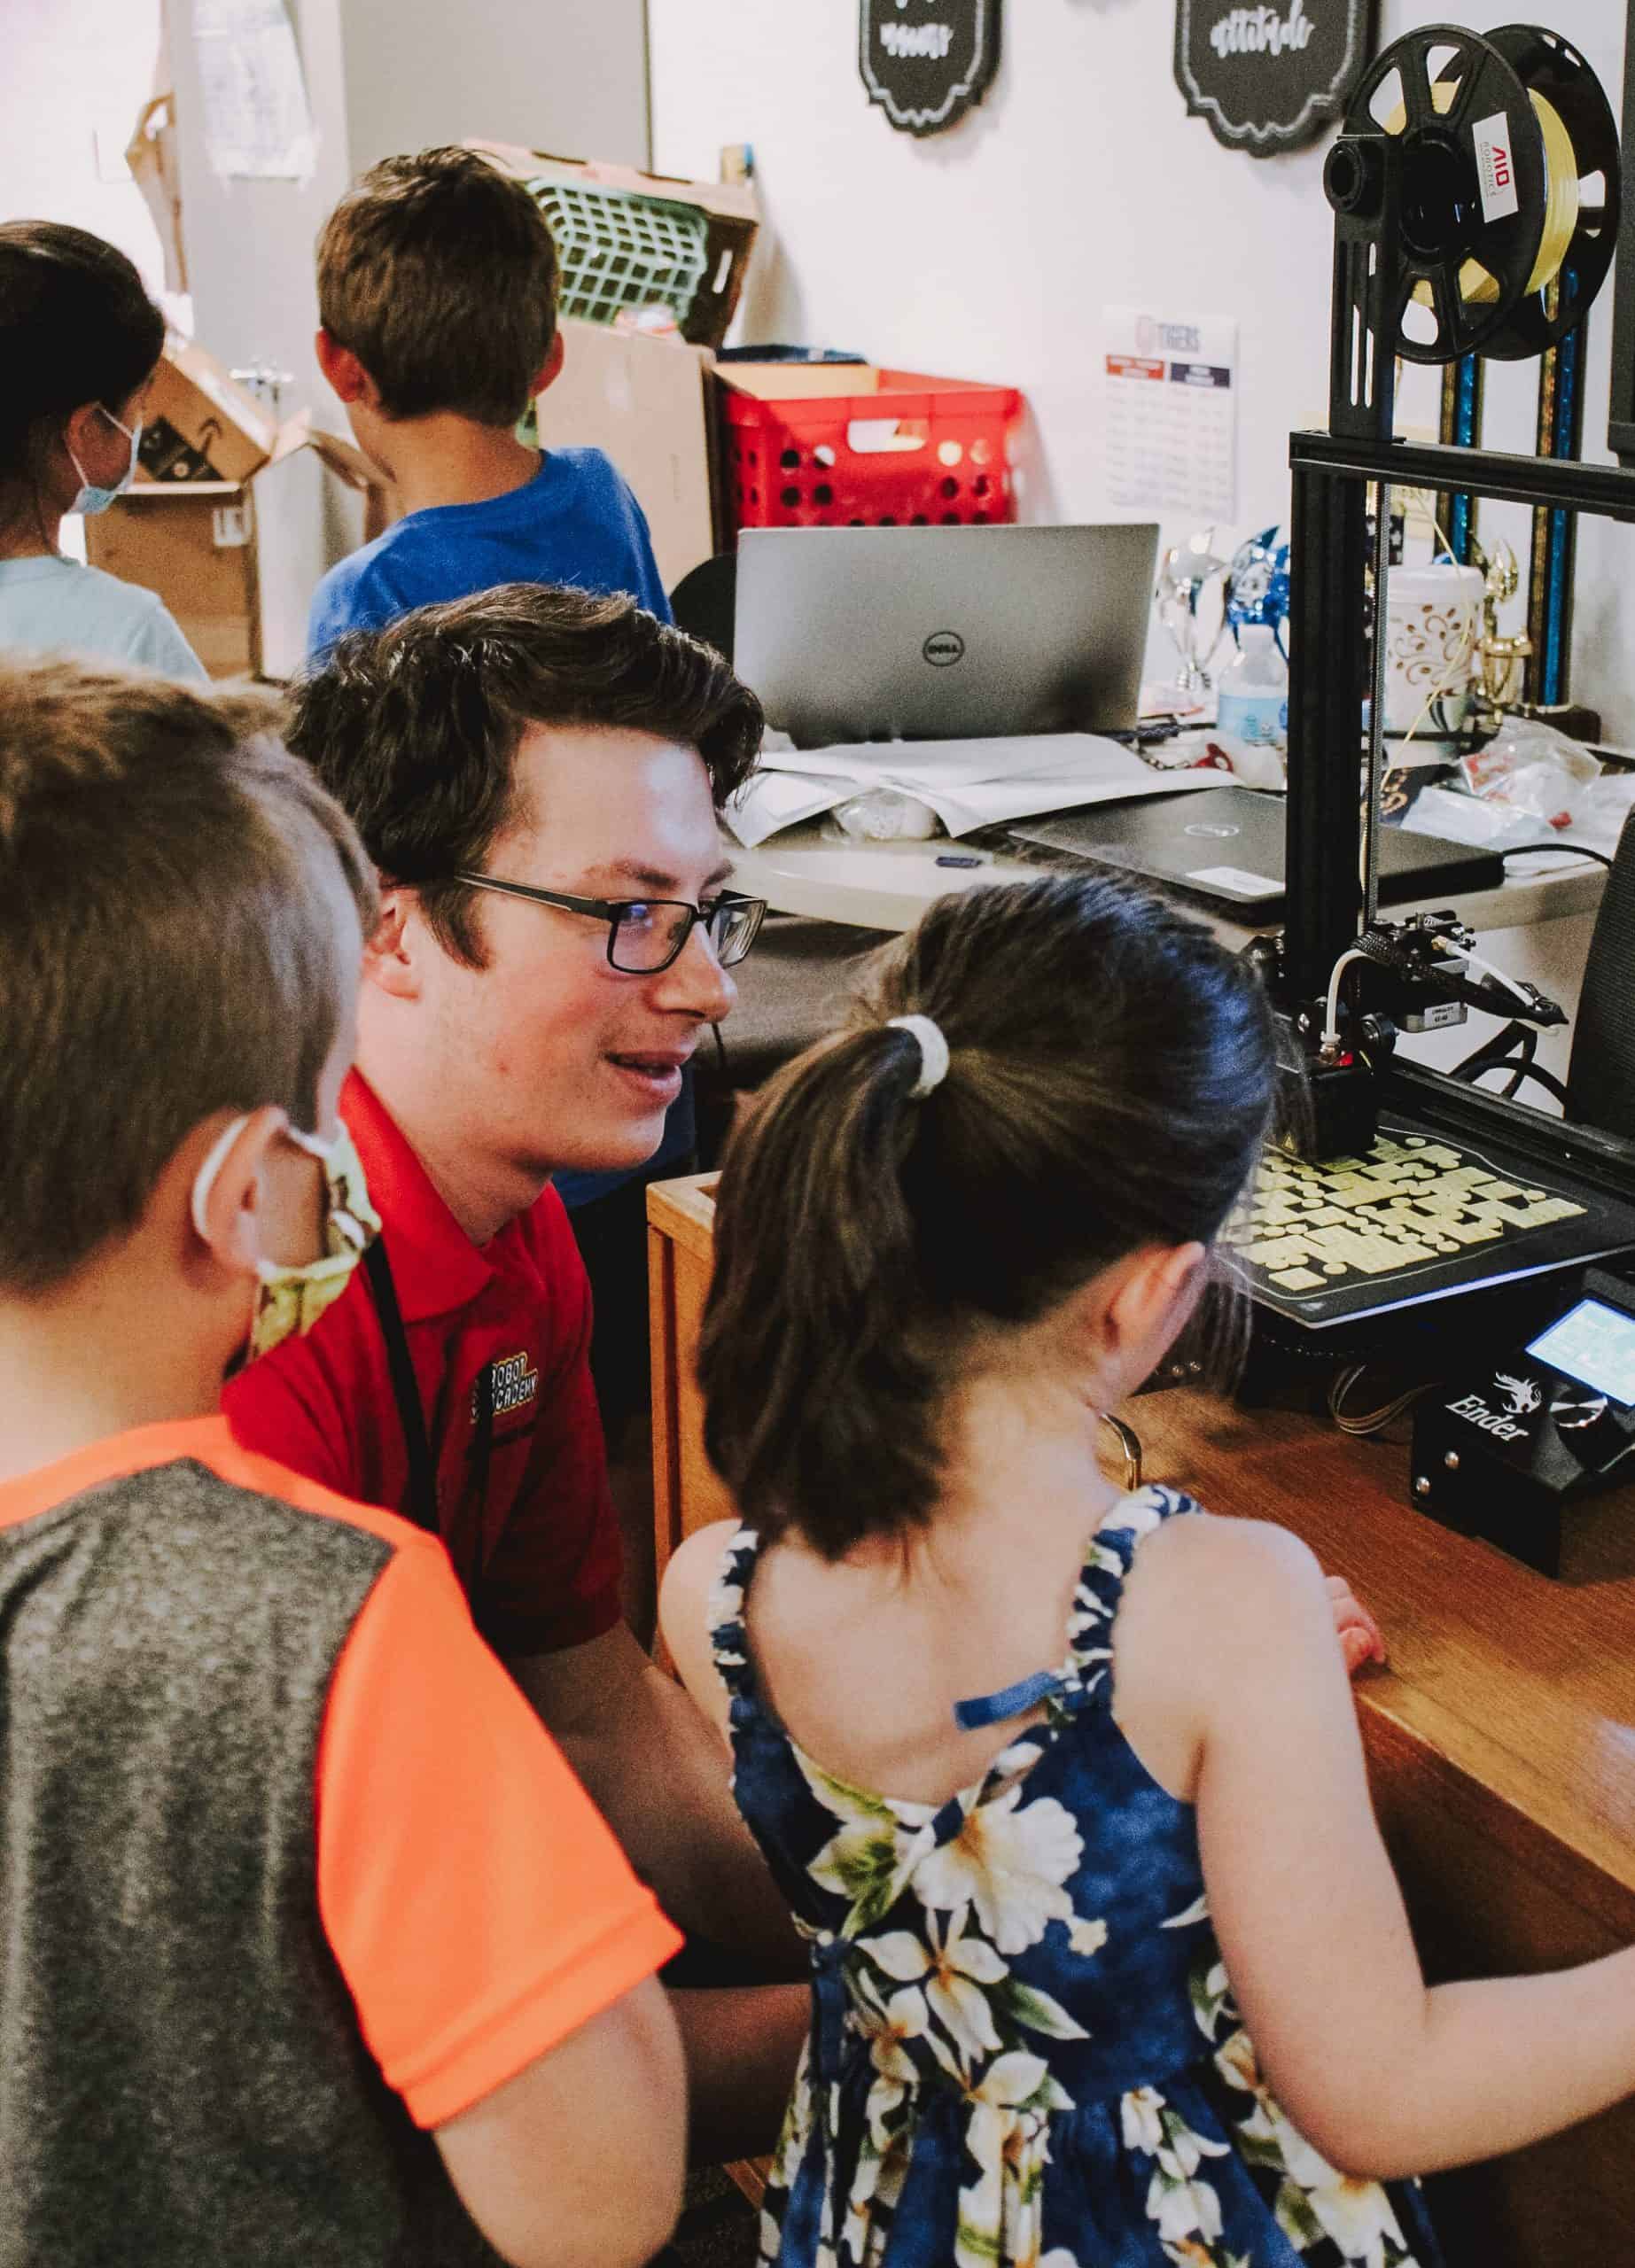 You are currently viewing Jr. LEGO® Robotics & 3D Printing Camp for ages 5 to 8 | Morning | 5 Days: June 19-23, 2023 | 9:30 am to 12:30 pm | Reynoldsburg